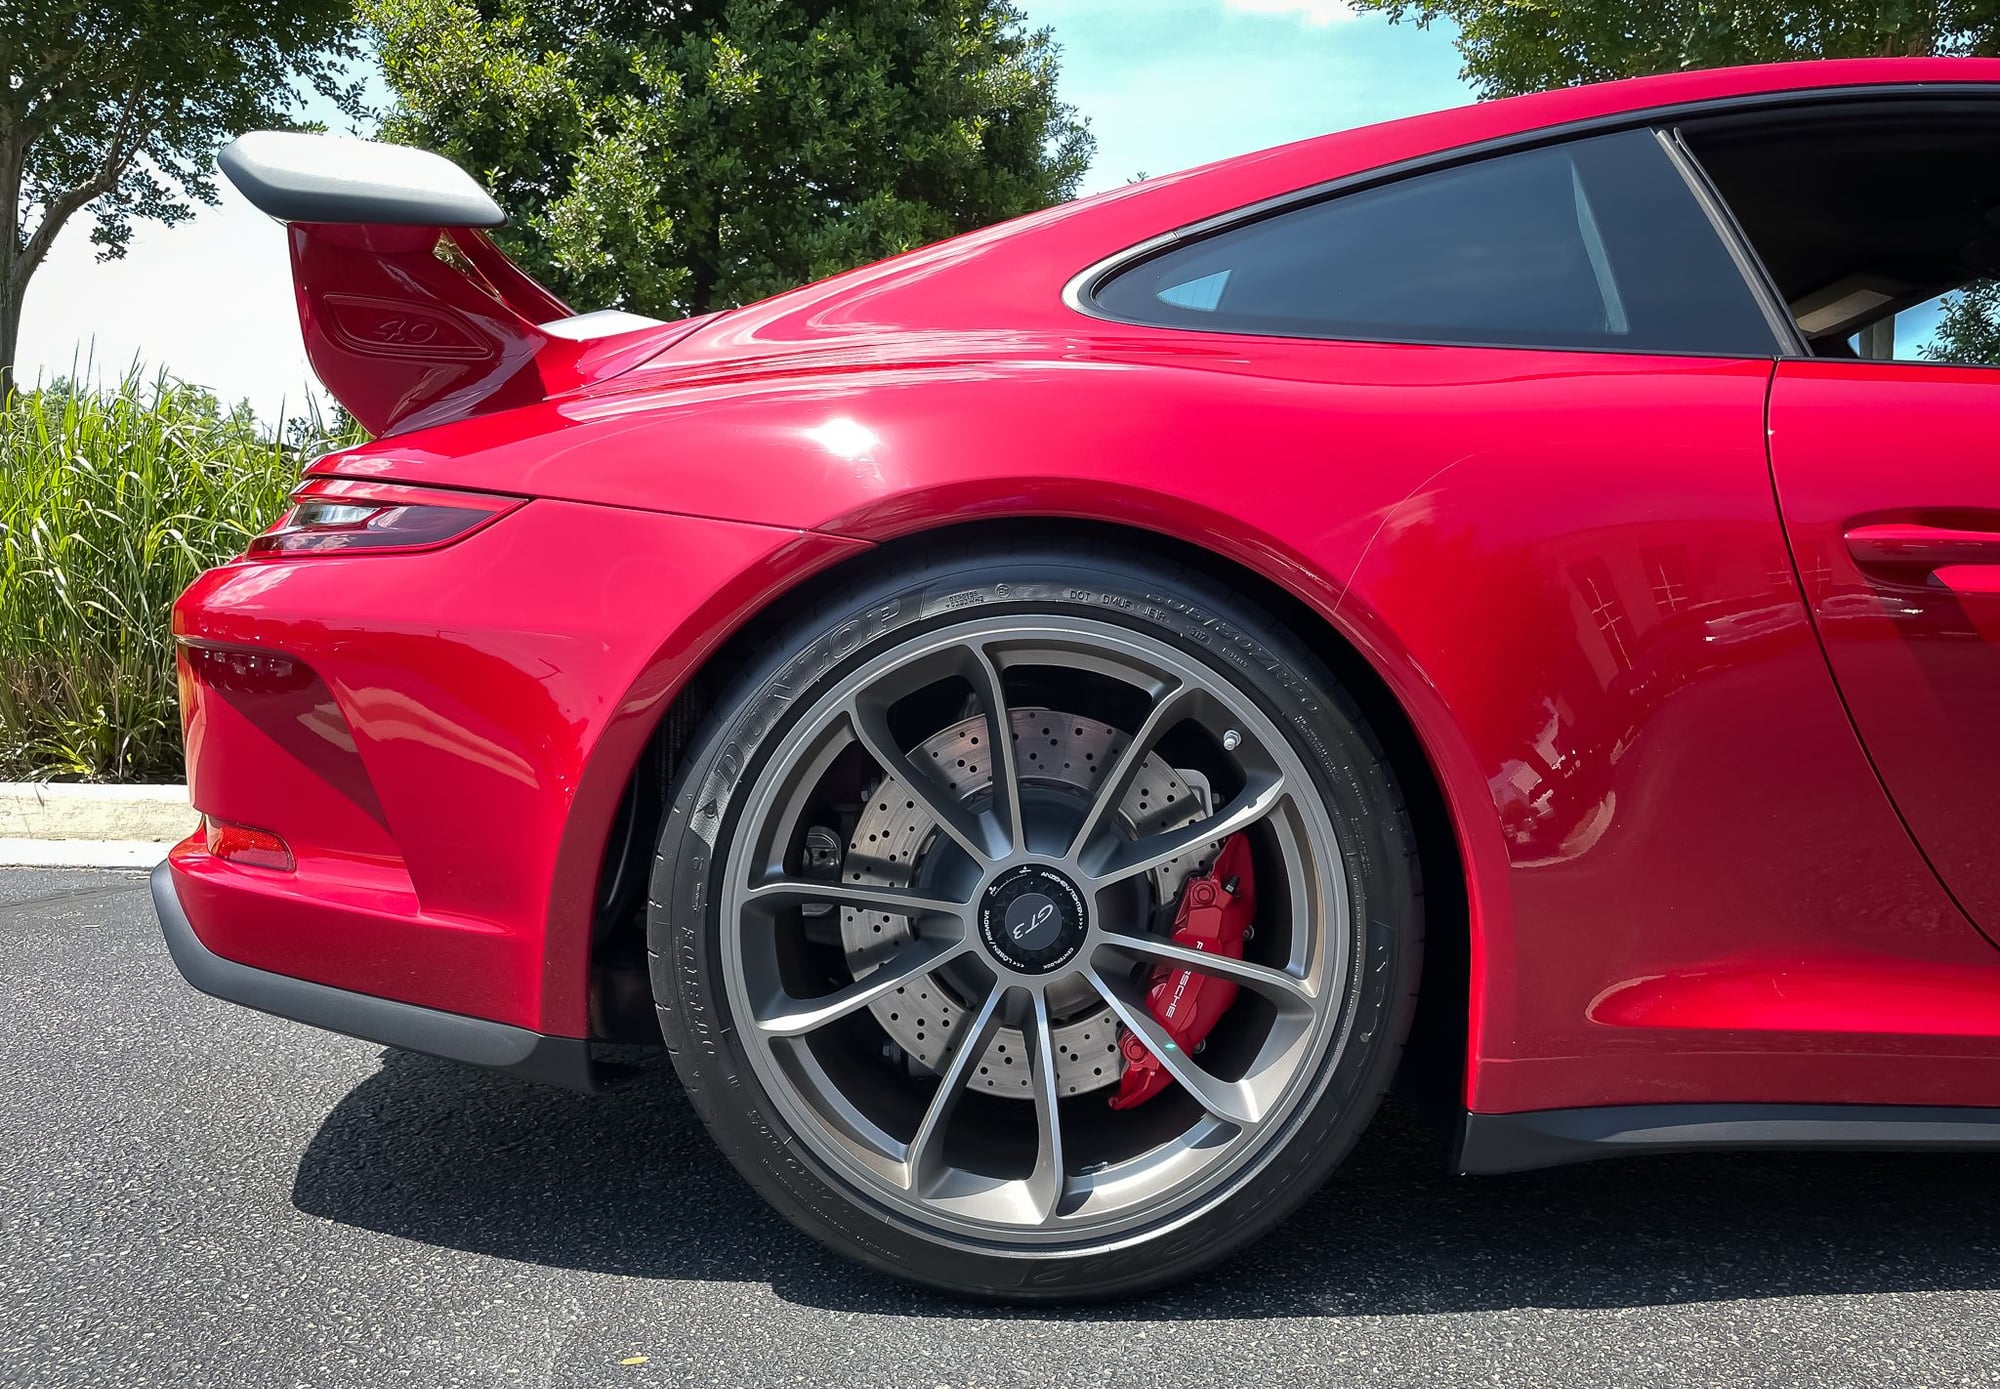 2018 Porsche GT3 - 2018 911 GT3-PDK-BUCKETS-CPO - Used - VIN WP0AC2A98JS174277 - 6,830 Miles - 2WD - Automatic - Coupe - Red - Richmond, VA 23113, United States